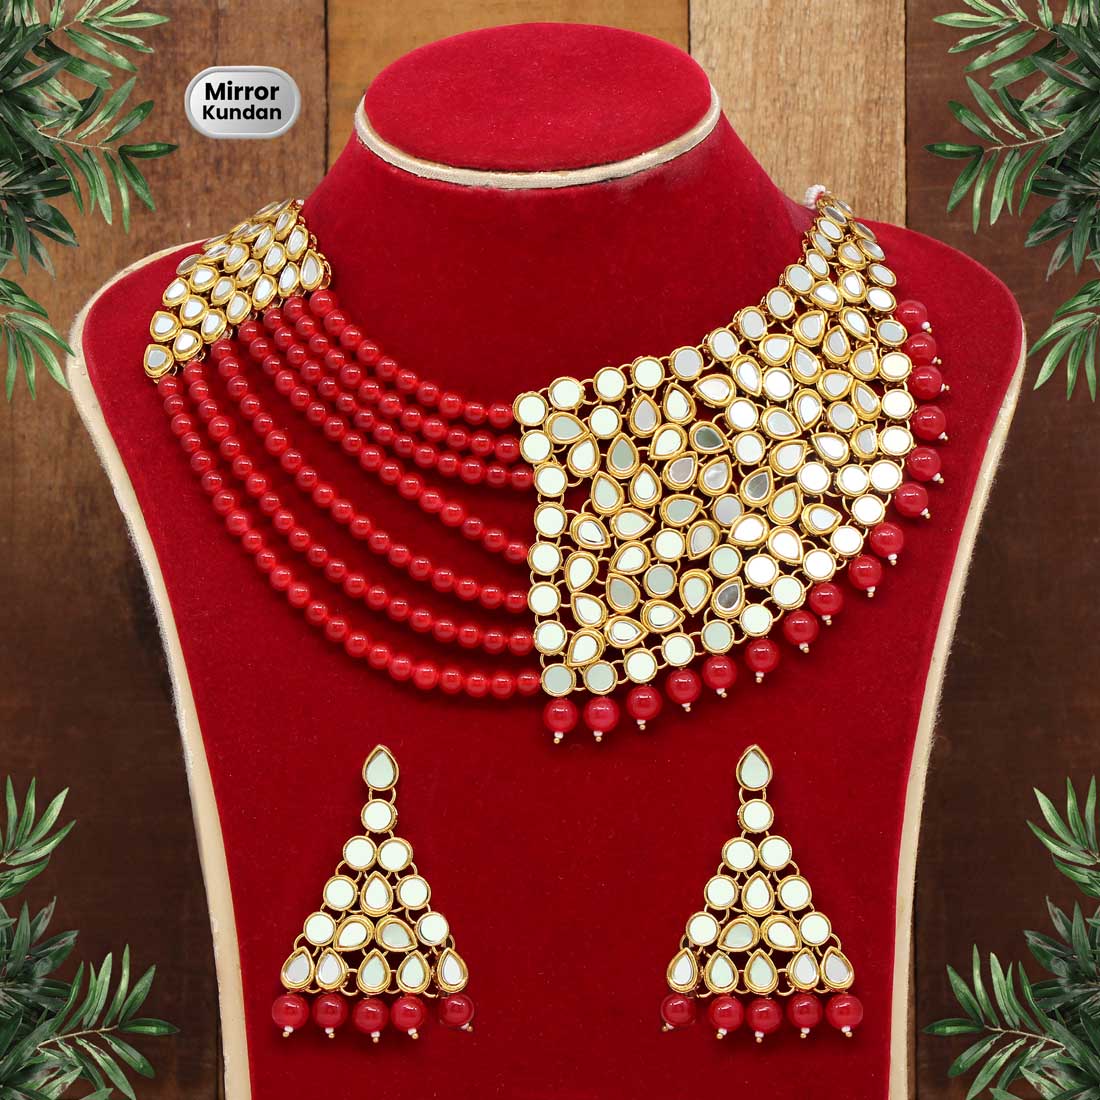 Red Color Mirror Kundan Necklace Set (MRN104RED) Jewelry GetGlit   